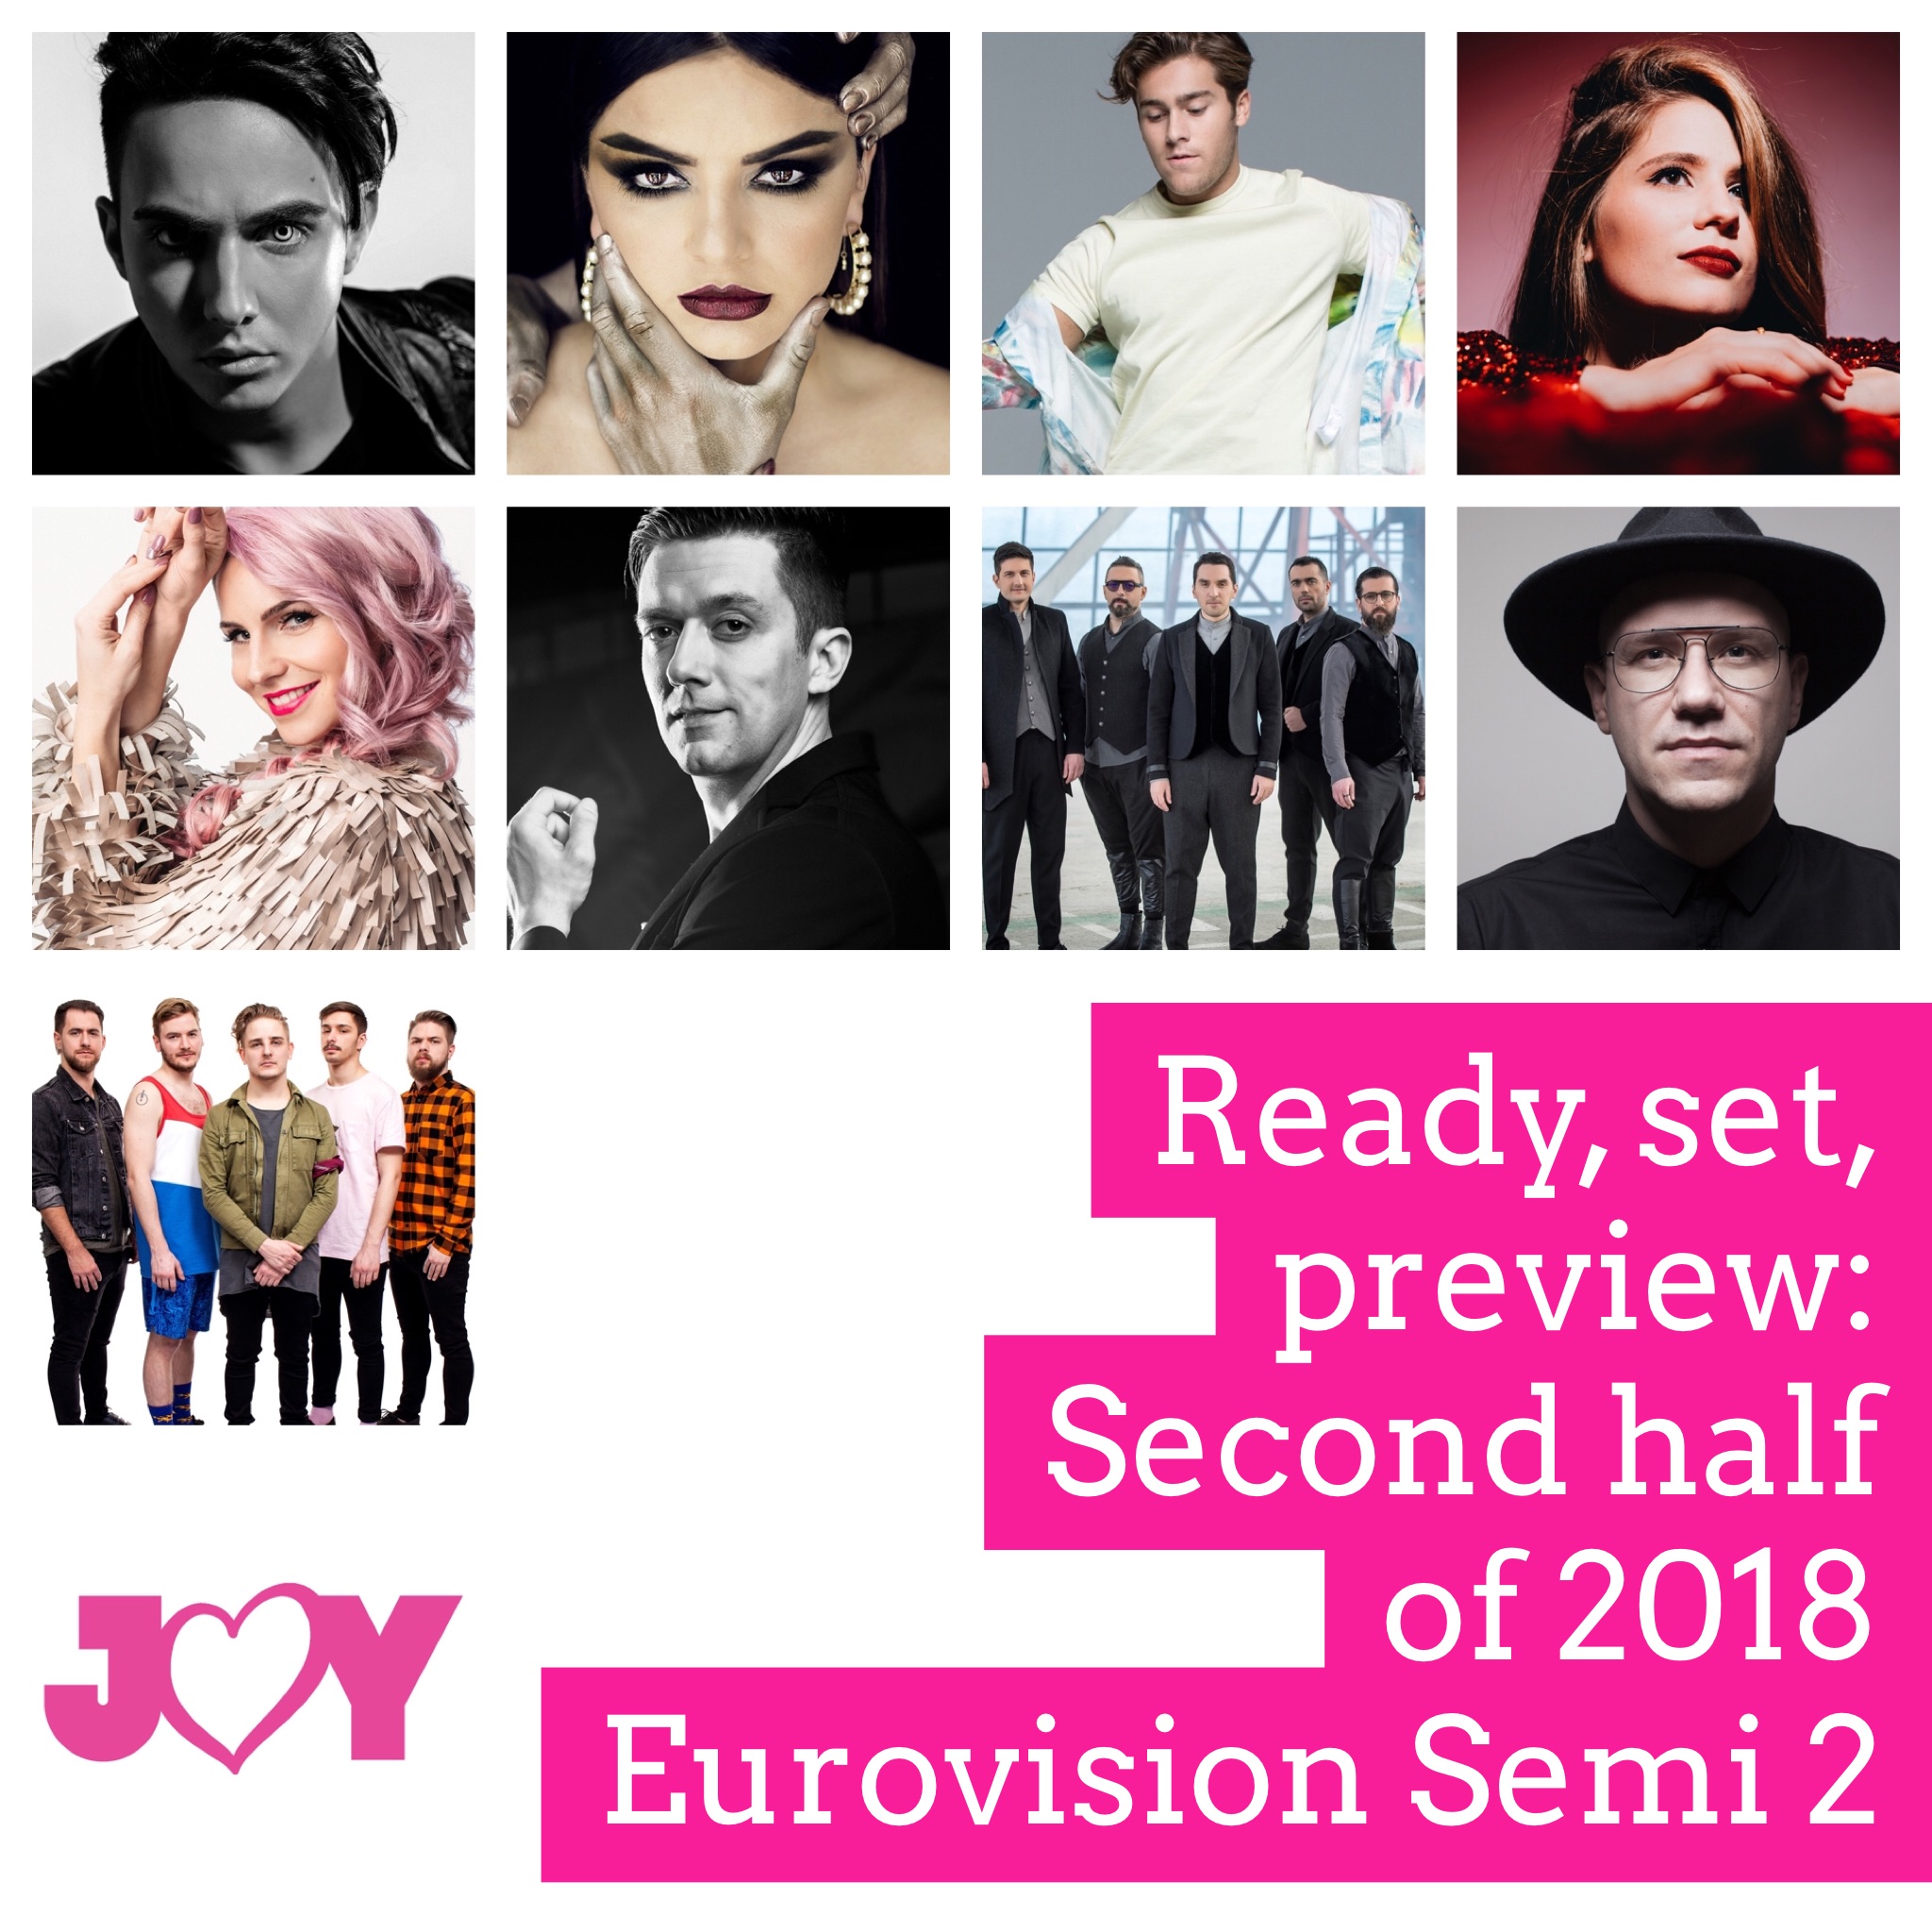 Eurovision 2018: Previewing the second half of Semi Final 2